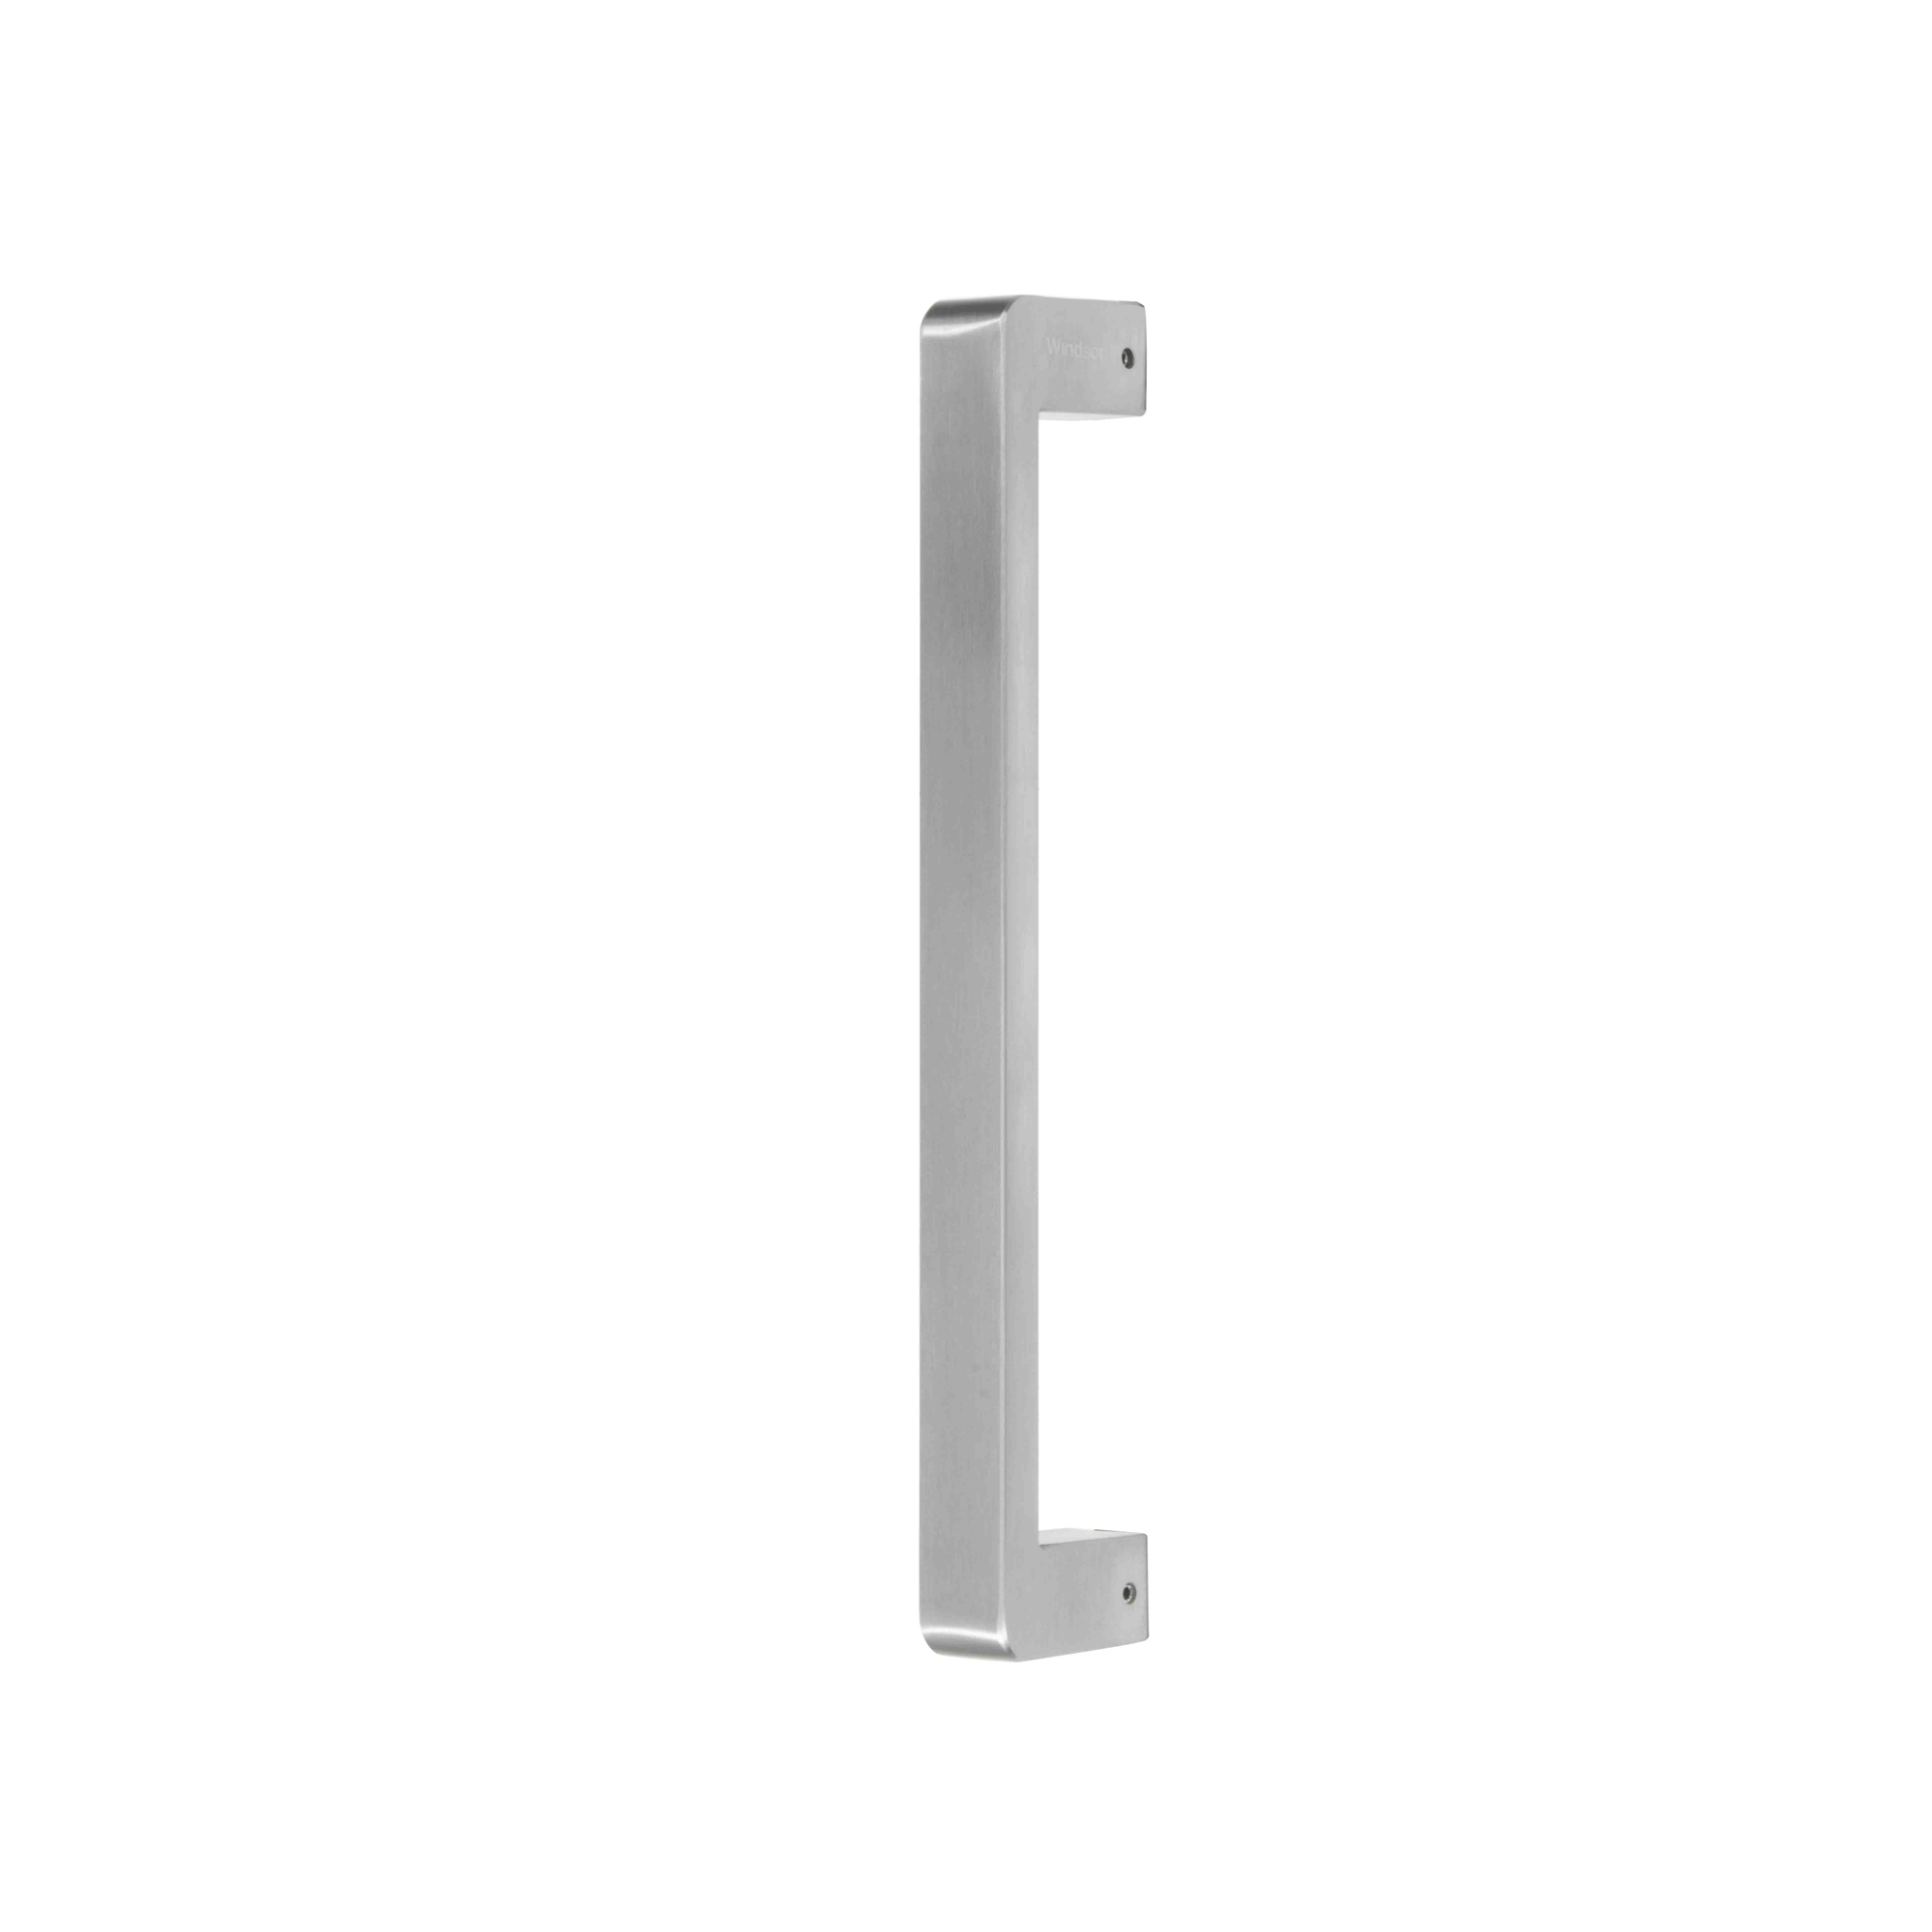 Round 300mm Push Pull Stainless Steel Door Handle Entrance Entry